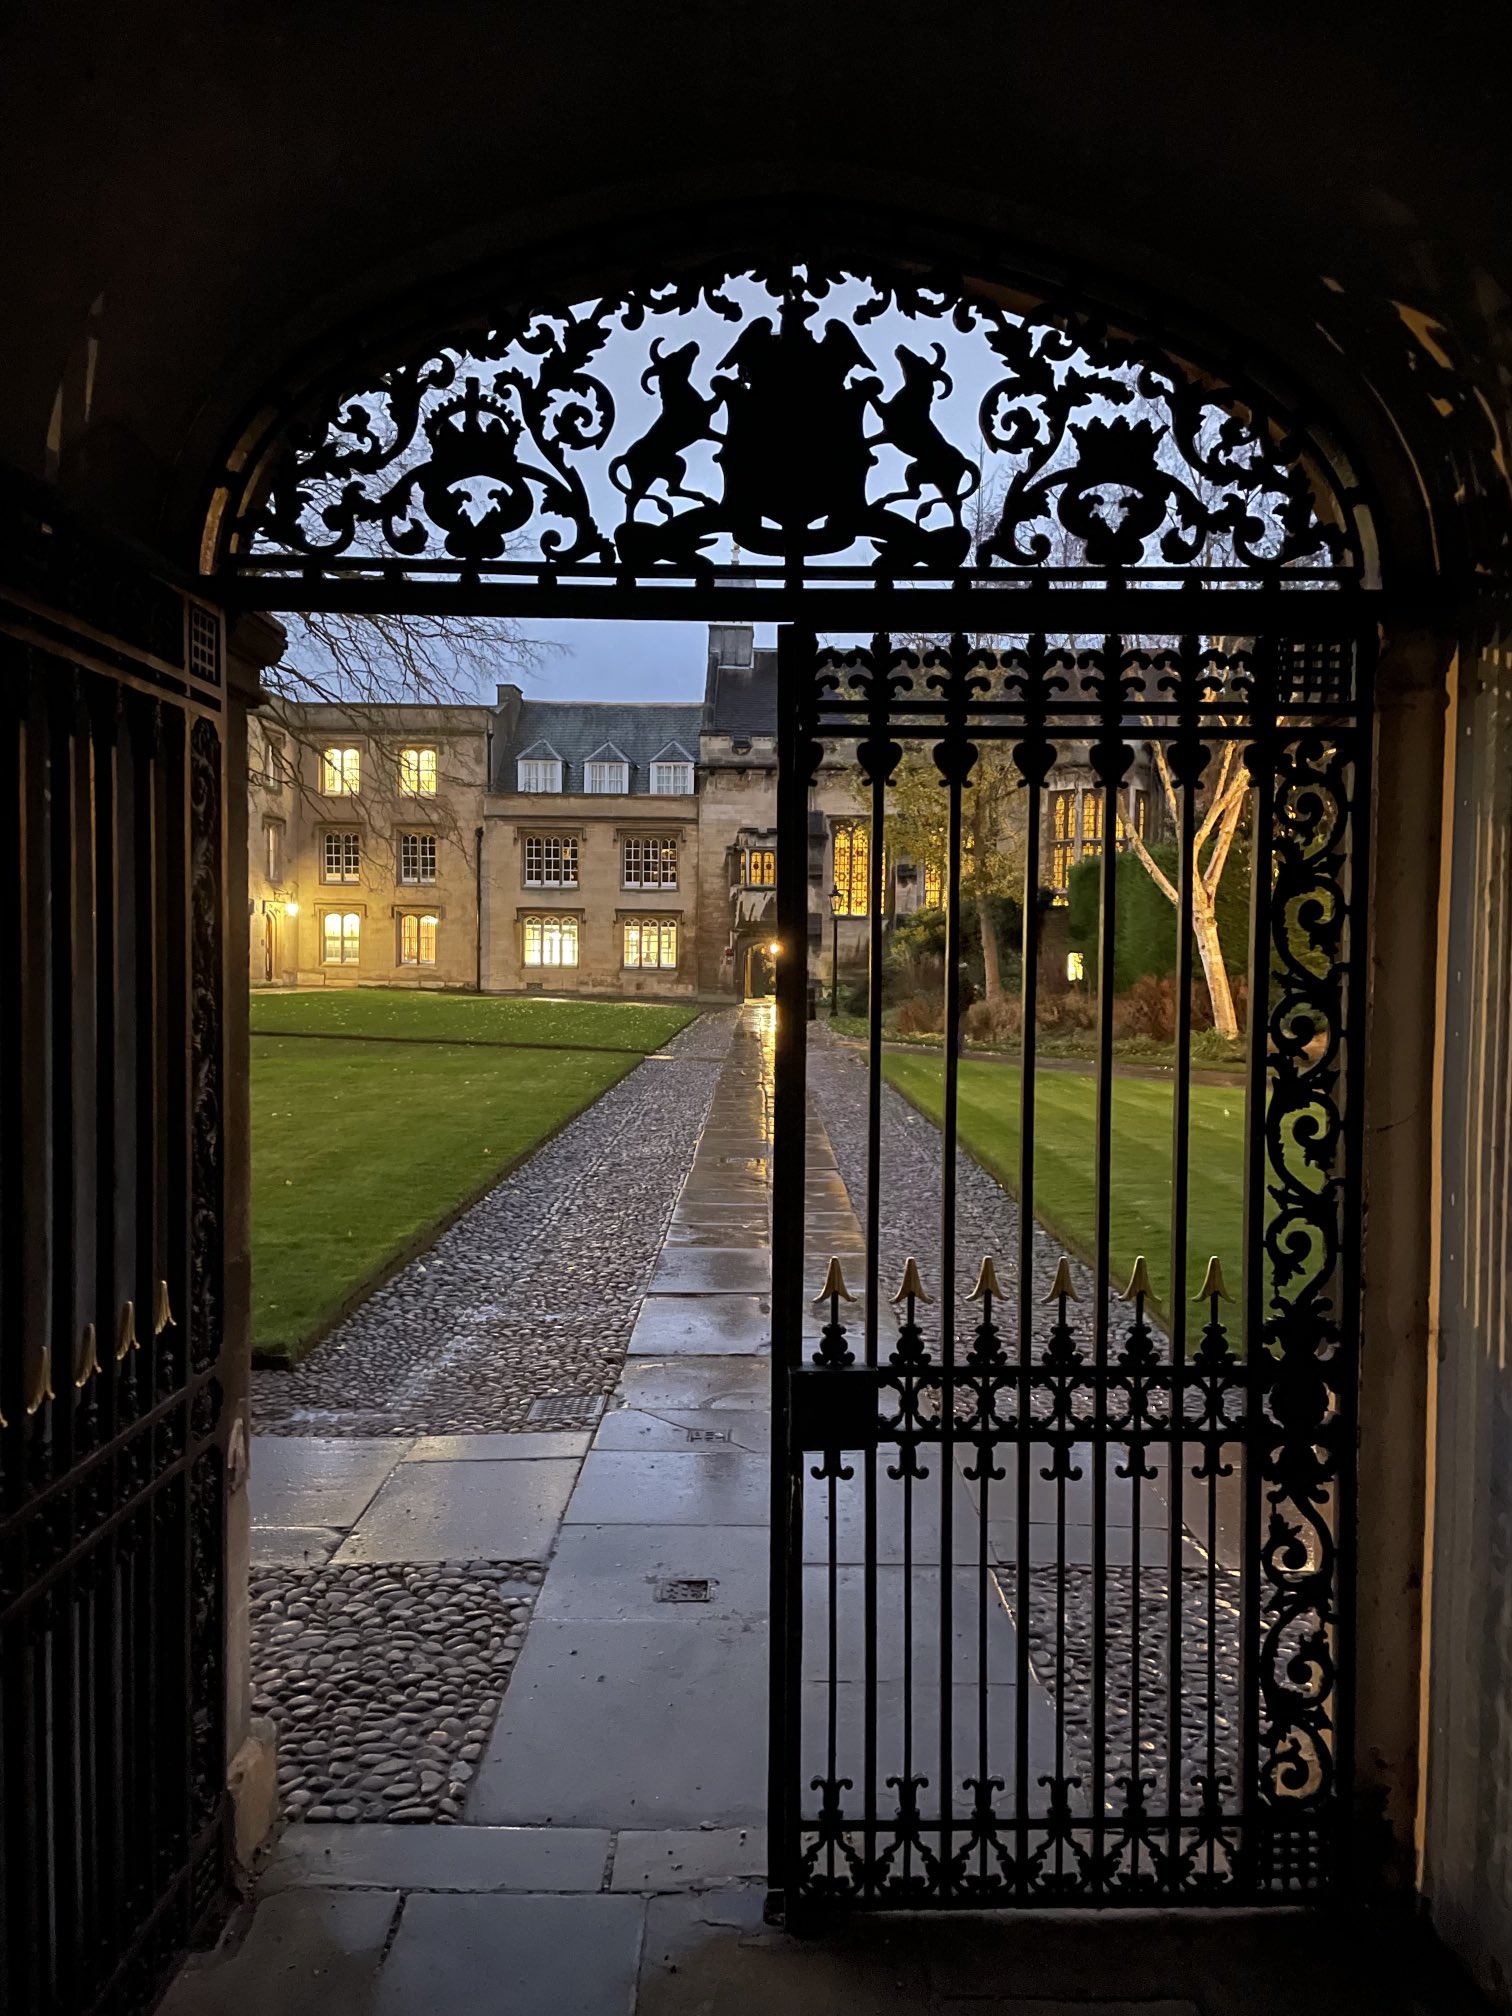 Second Court at dusk through the gate from the Fellows' Garden